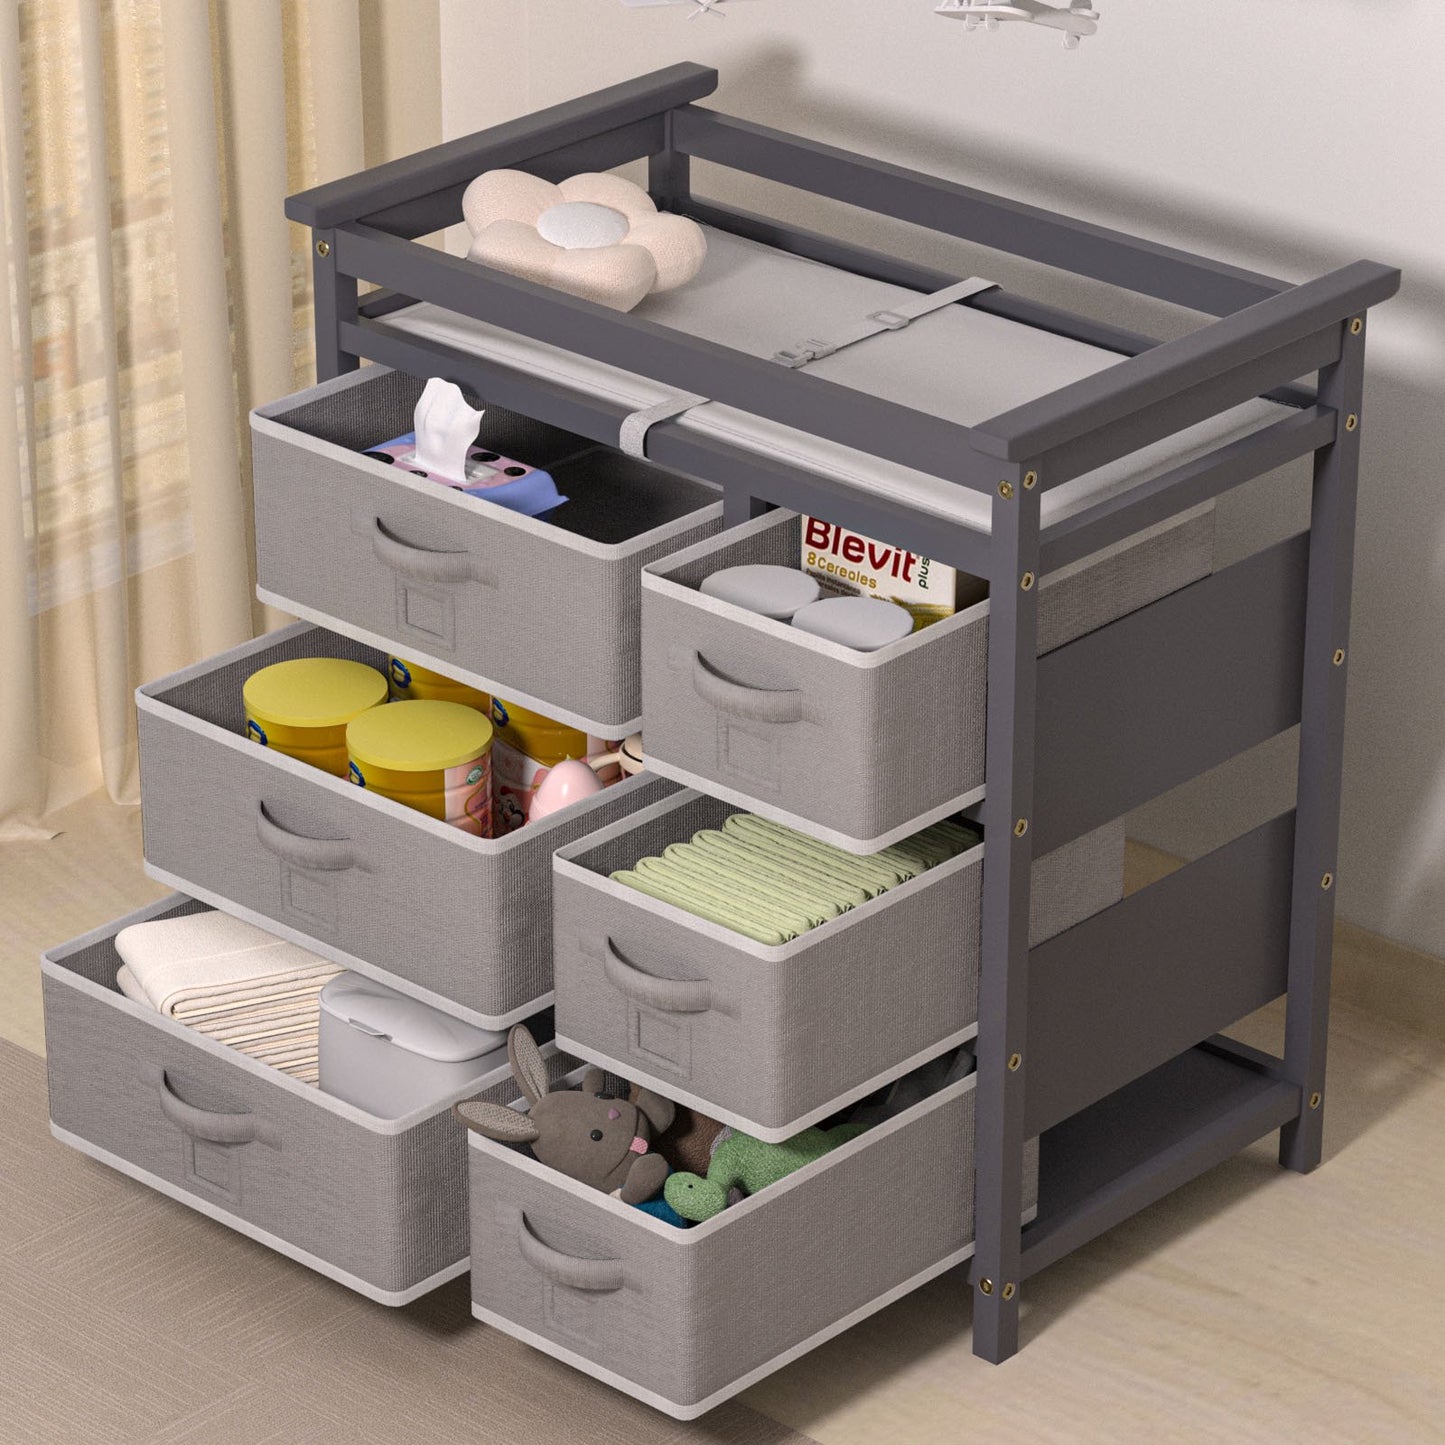 Baby Changing Table with 6 Storage Baskets, Can be Used as a Changing Table Dresser with Changing Table Top, a Baby Changing Station, a Diaper Changing Station (Gray)